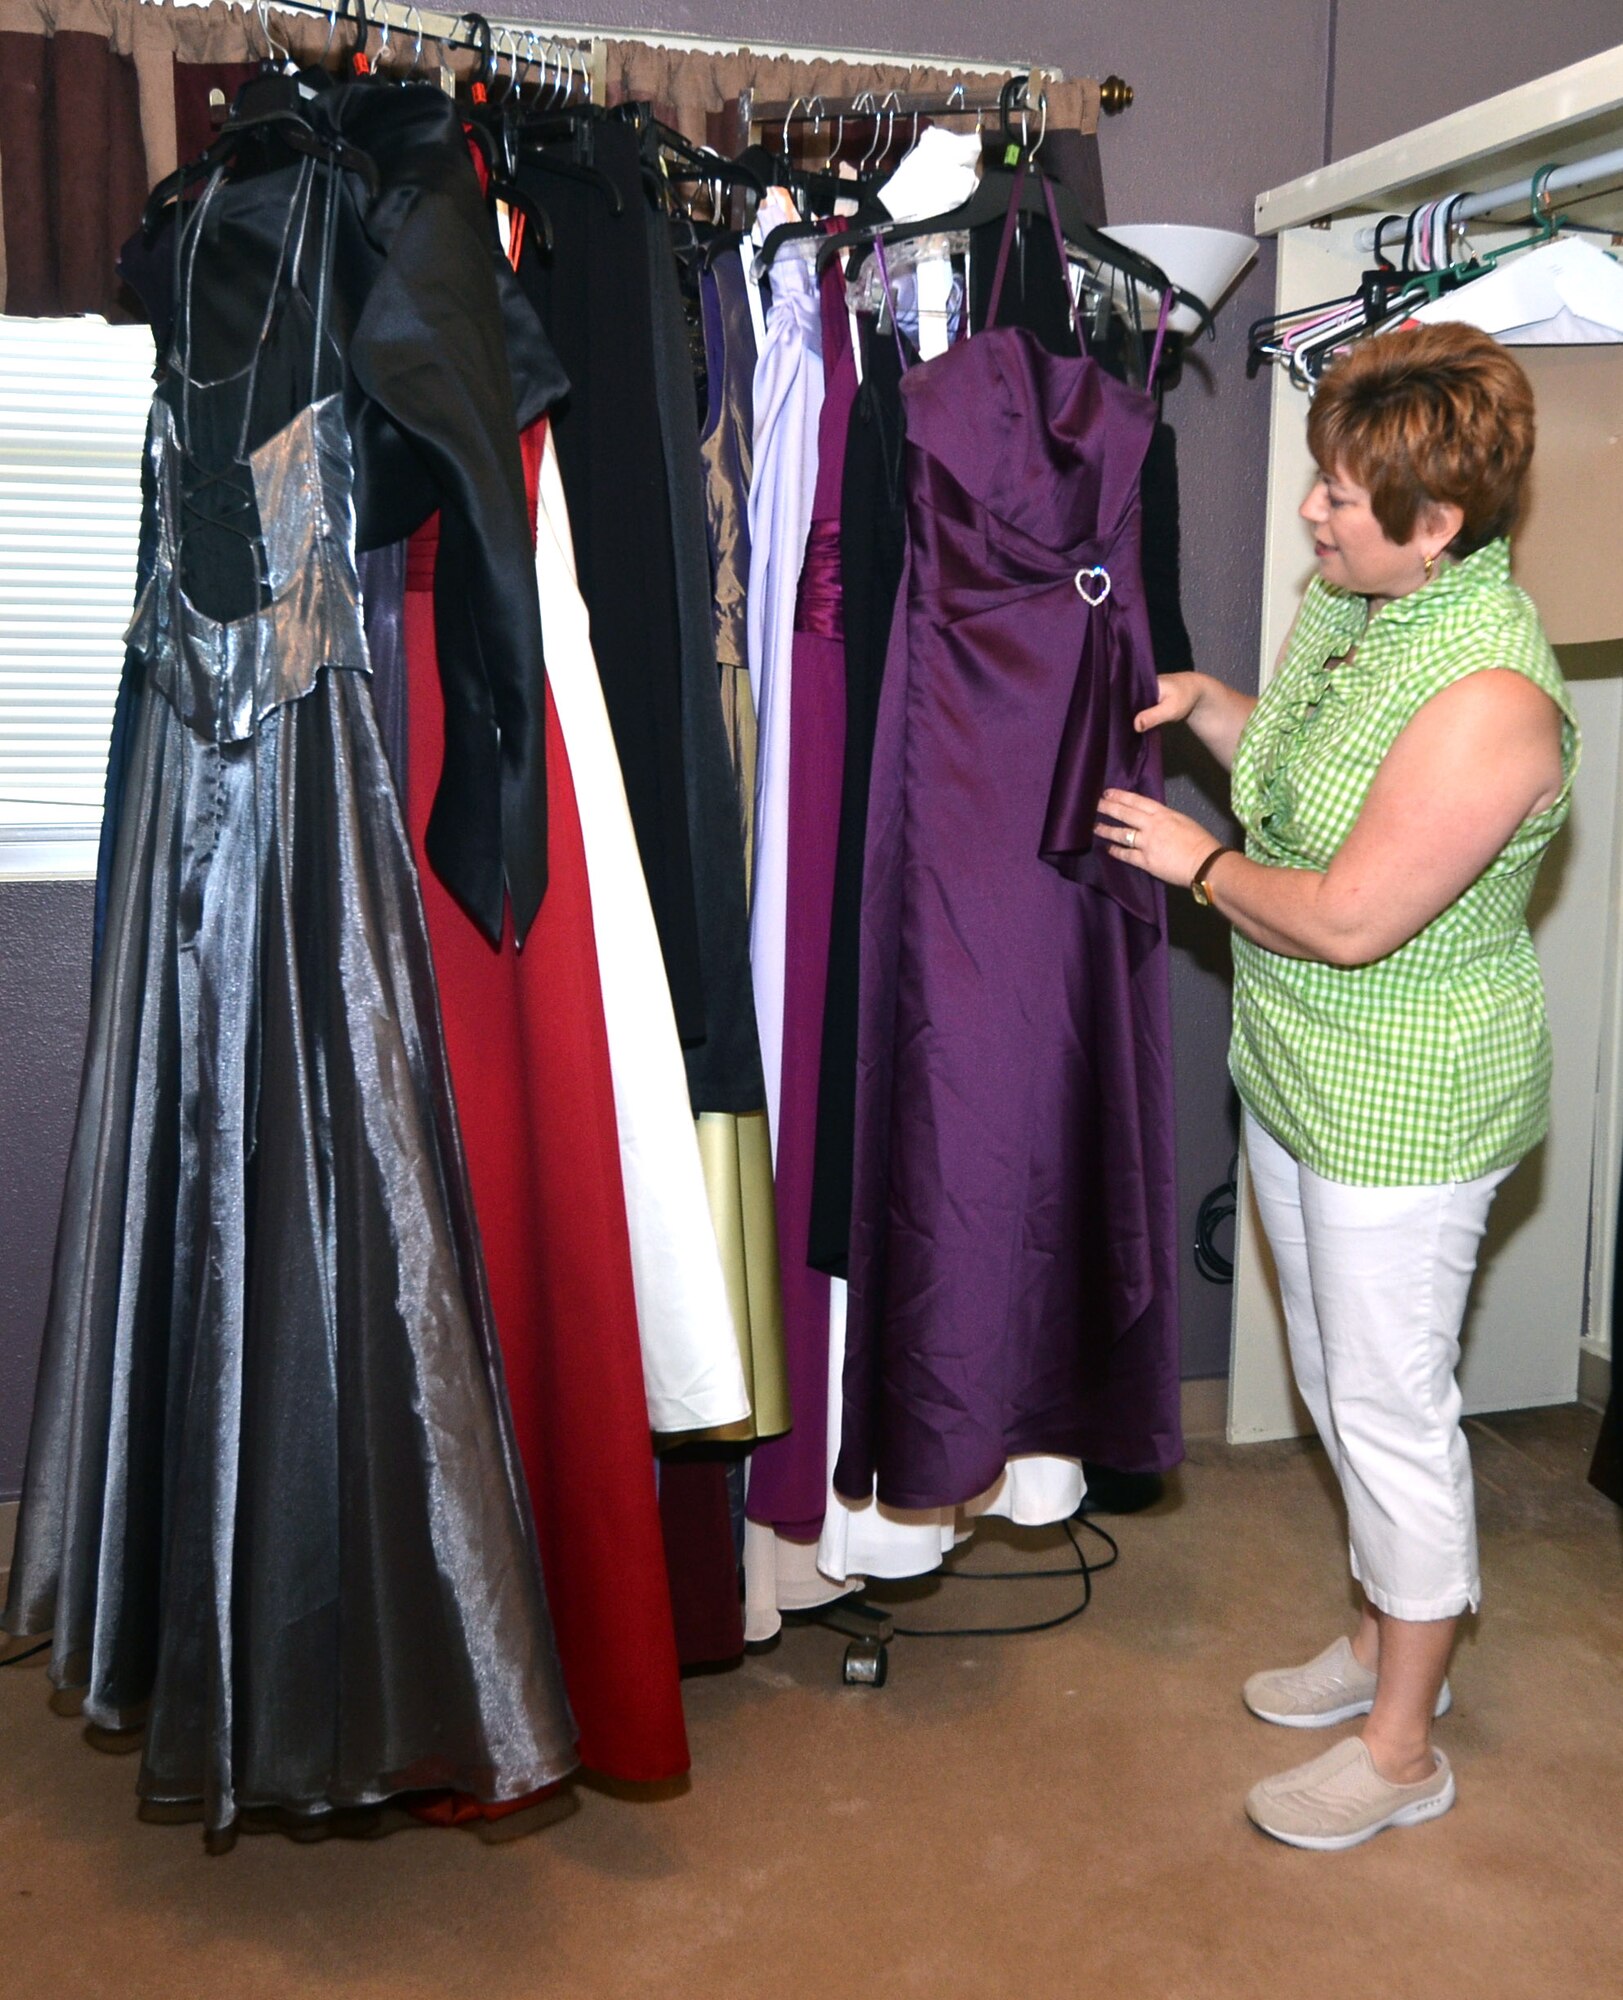 Judy Slisik, Command Chief Master Sgt. Slisik’s wife, looks at a dress in the Cinderella’s Closet at Andersen Air Force Base, Guam, Dec. 3, 2013. The Cinderella’s Closet houses approximately 250 dresses available in a variety of sizes, colors and lengths and can be borrowed by military members or their families for any formal occasion. (U.S. Air Force by Airman 1st Class Mariah Haddenham/Released)